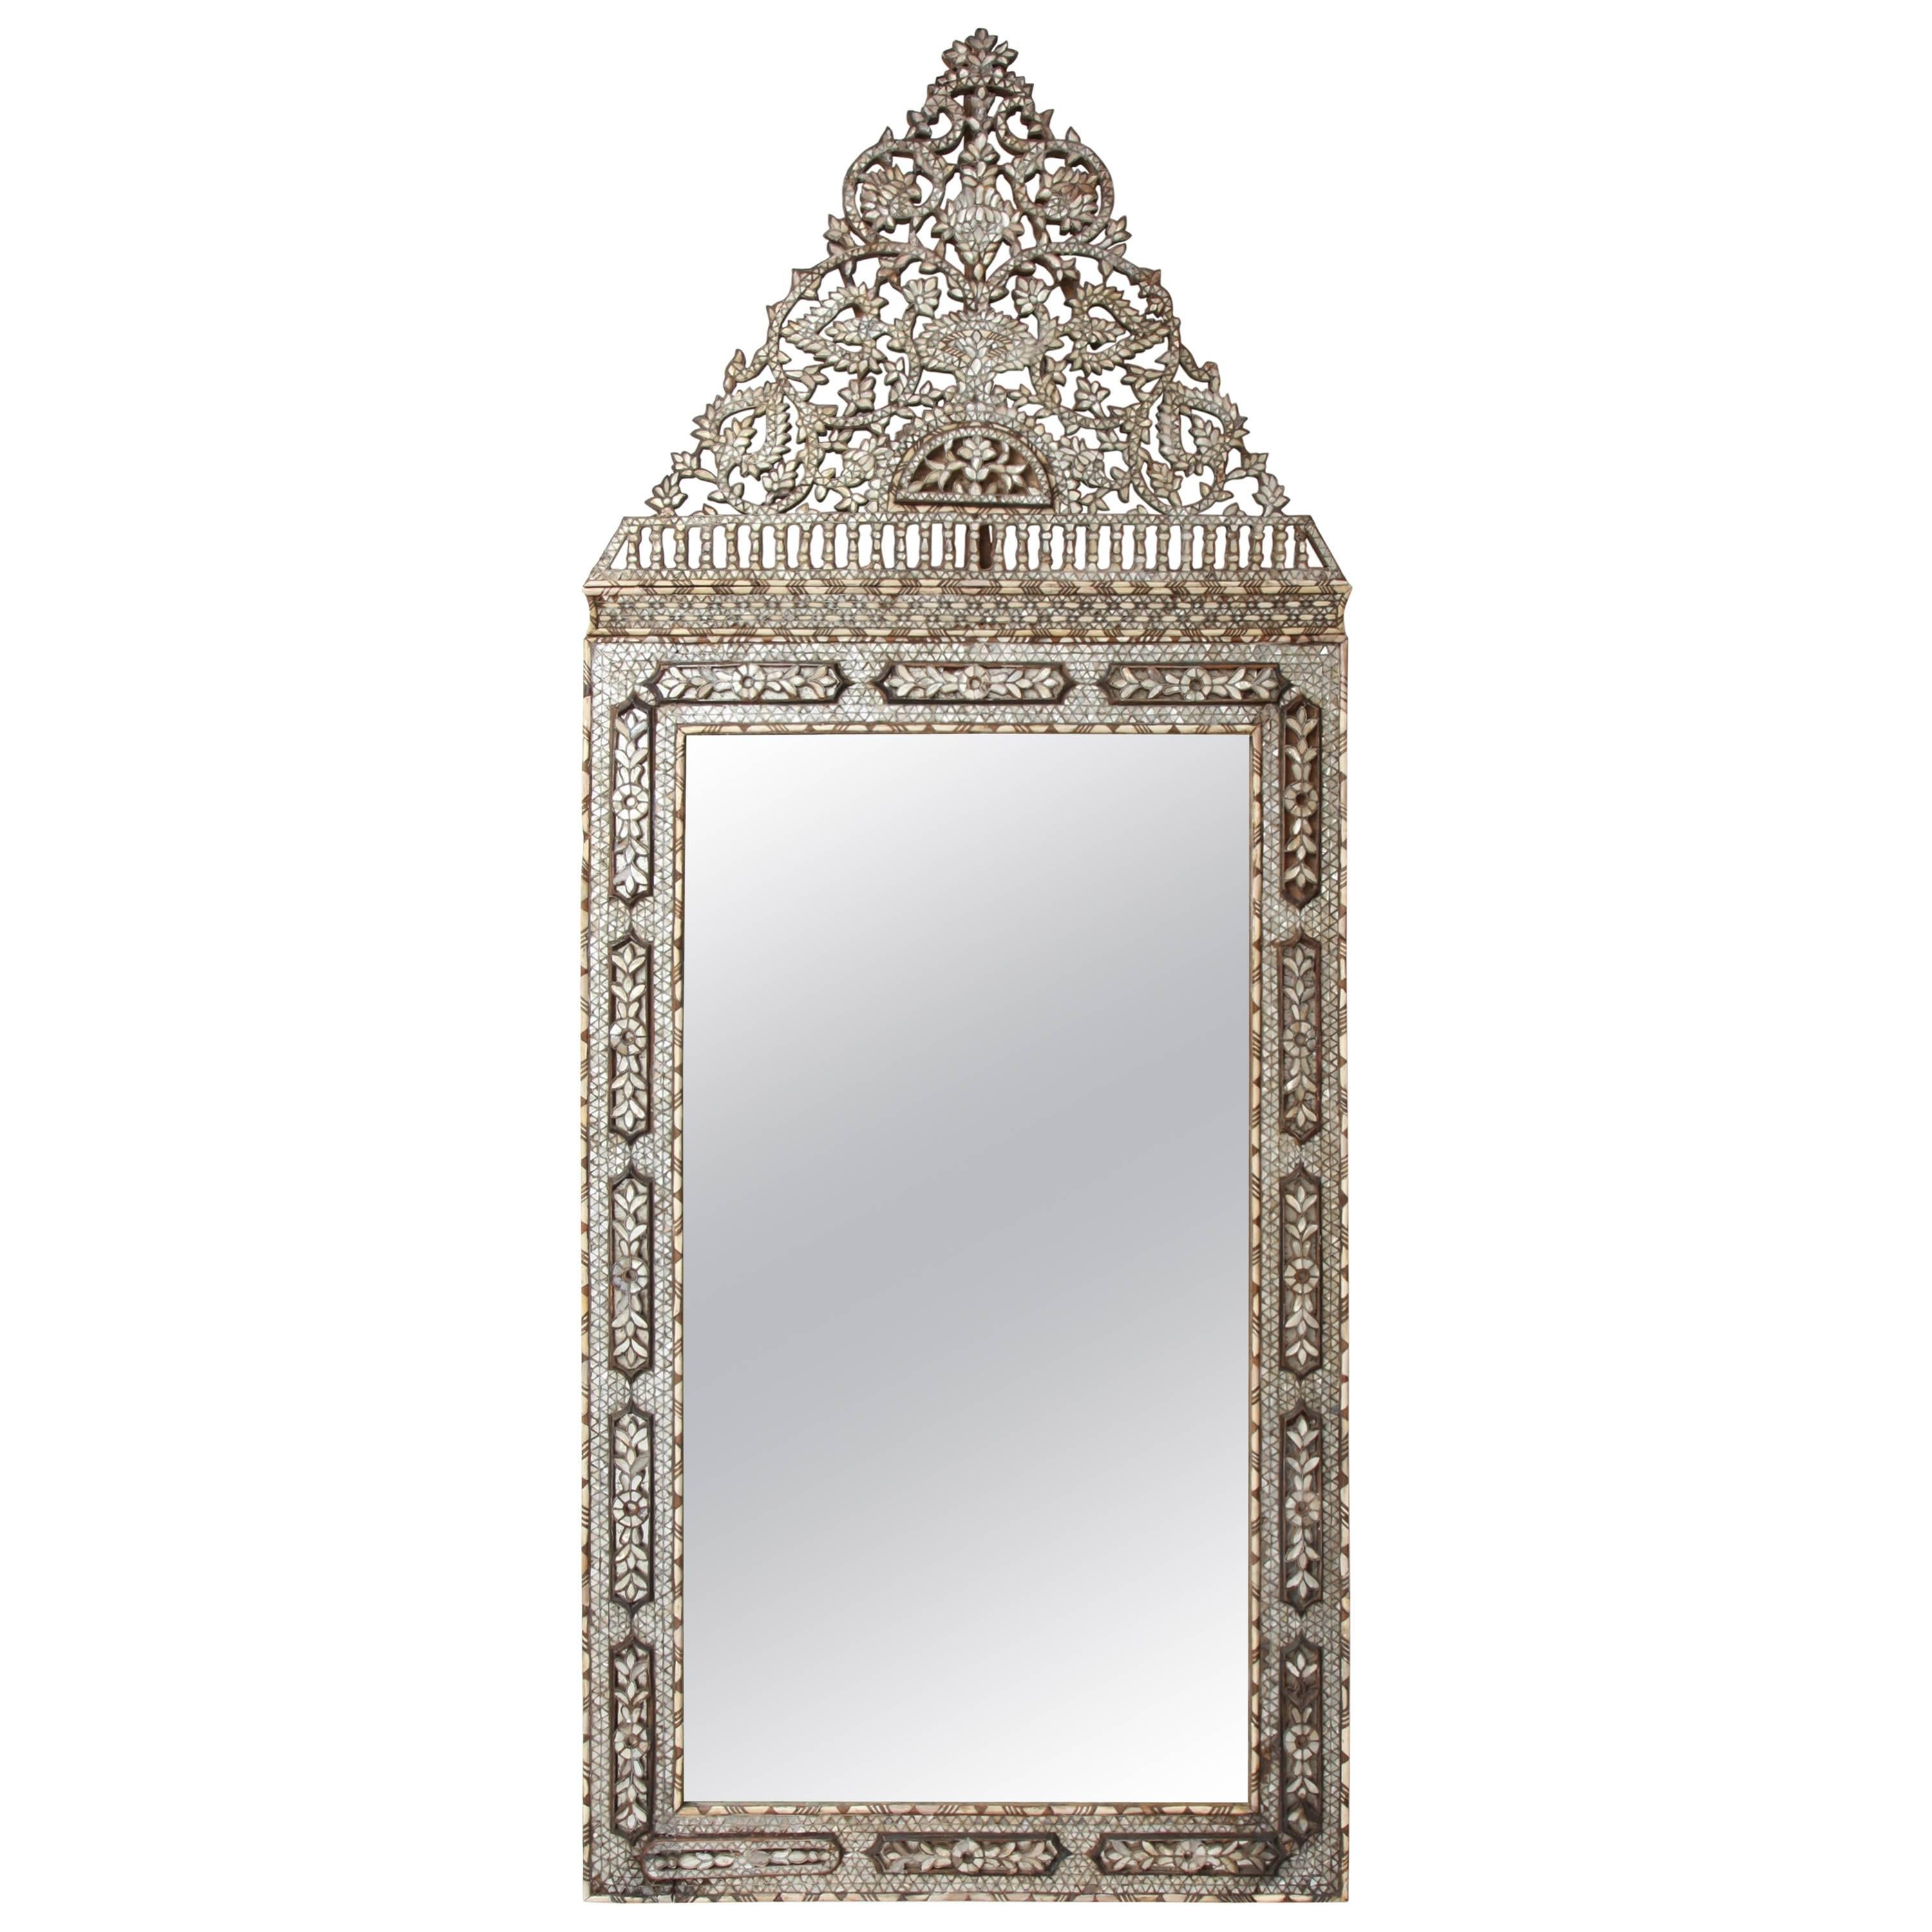 Exceptional 19th Century Syrian Mirror For Sale